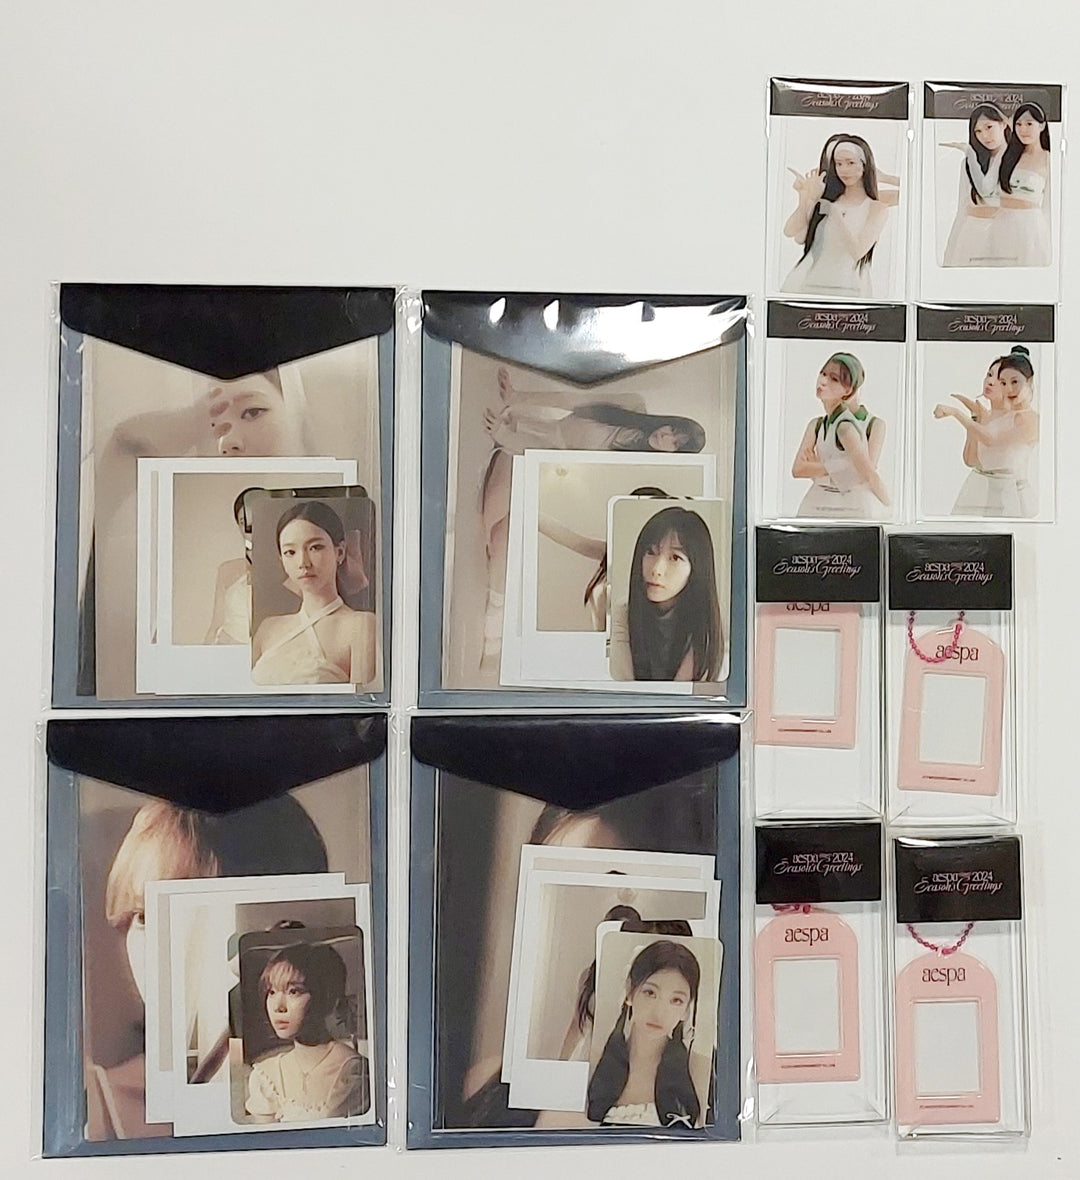 Aespa 2024 Season's Greetings - Pop-Up Store MD [ID Photo Keyring, Photo Pack, Clear Photocard] [24.1.3]